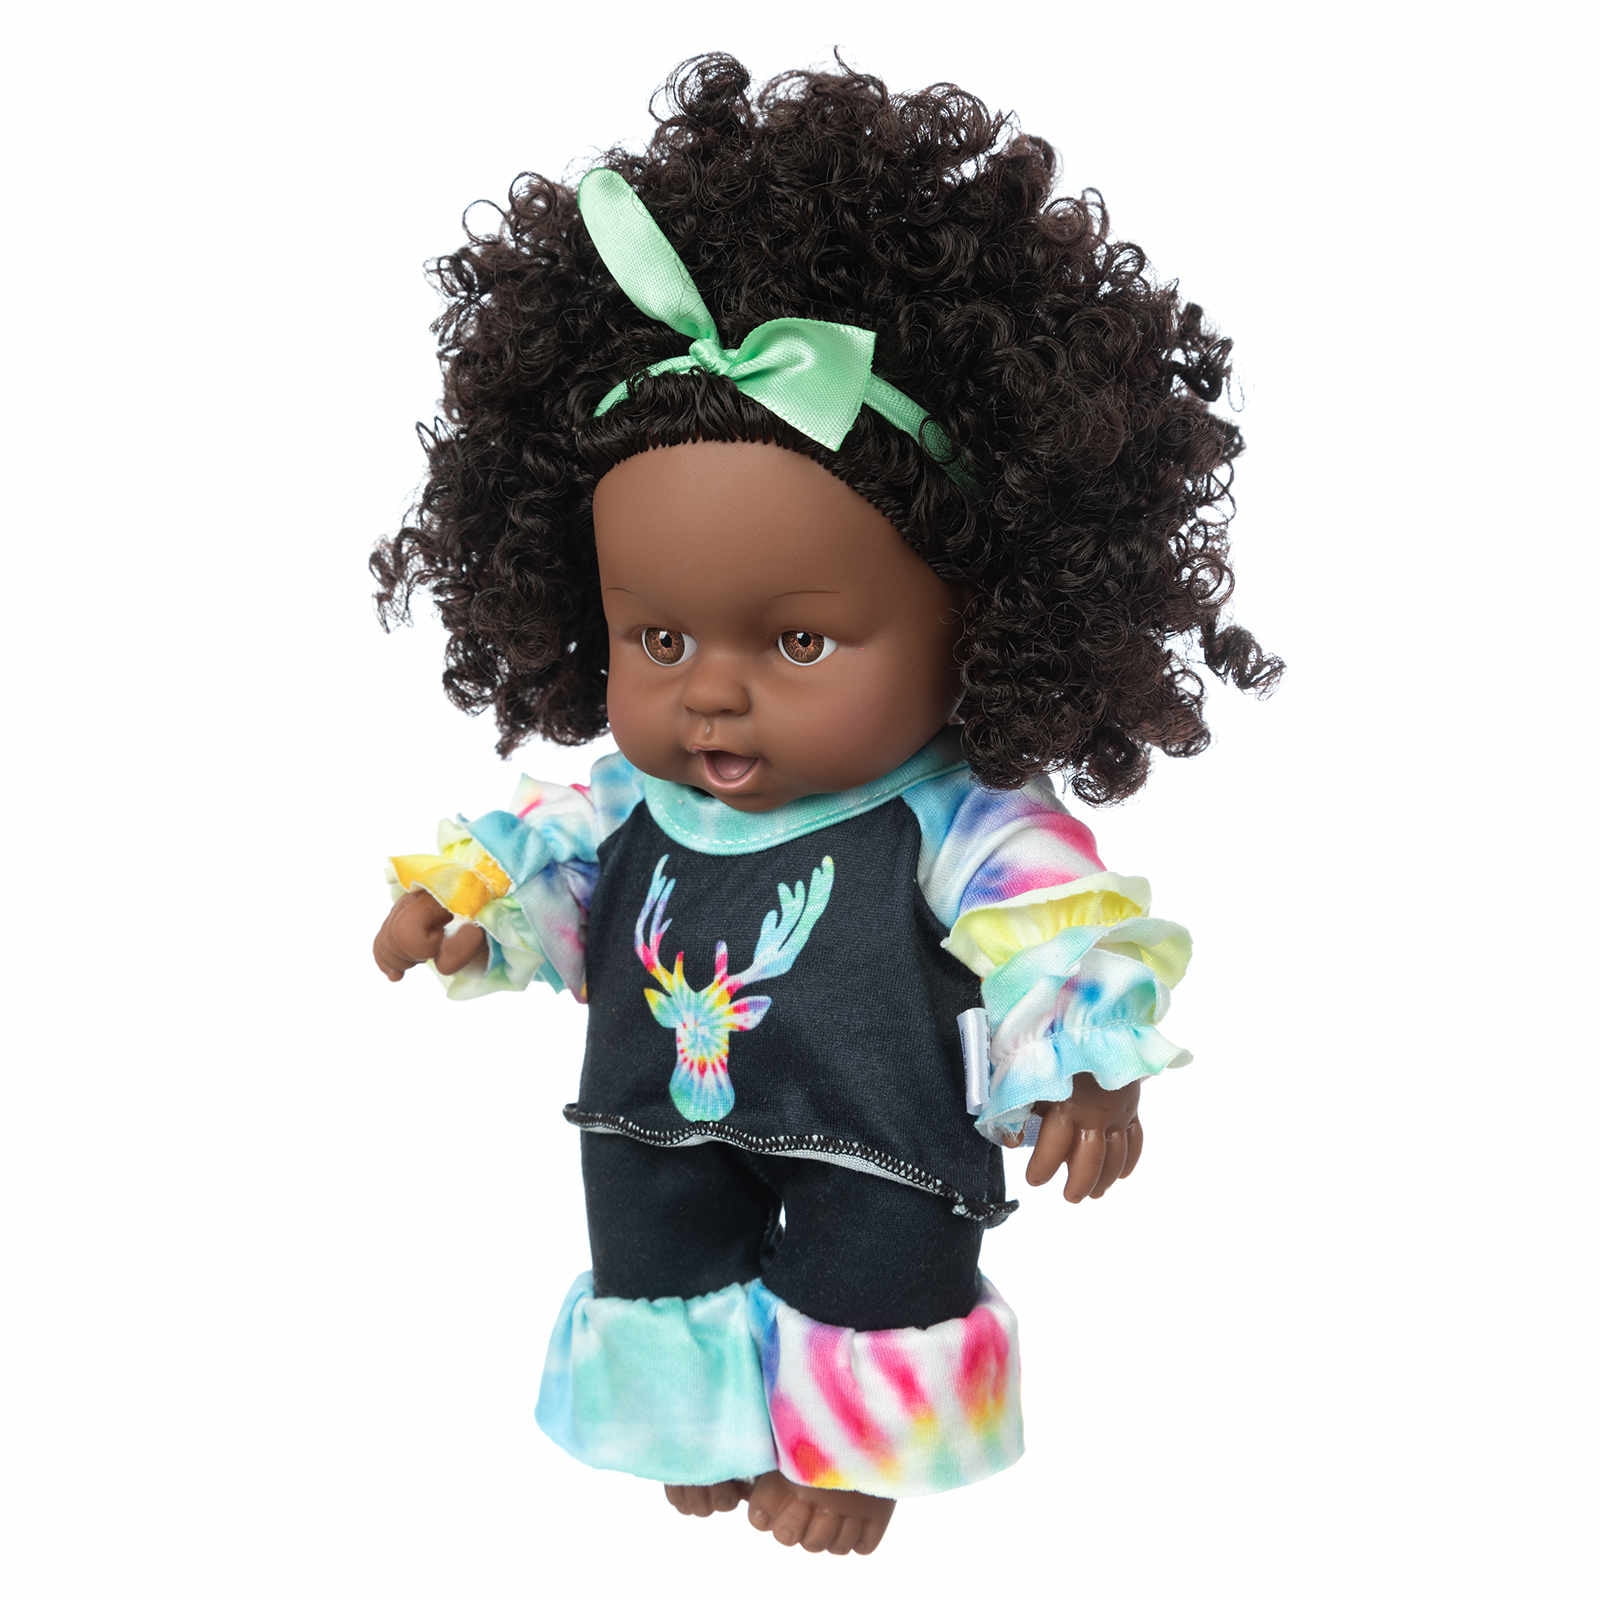 Sehao Cute Curly Black African Black Baby Doll Mini Kuwait